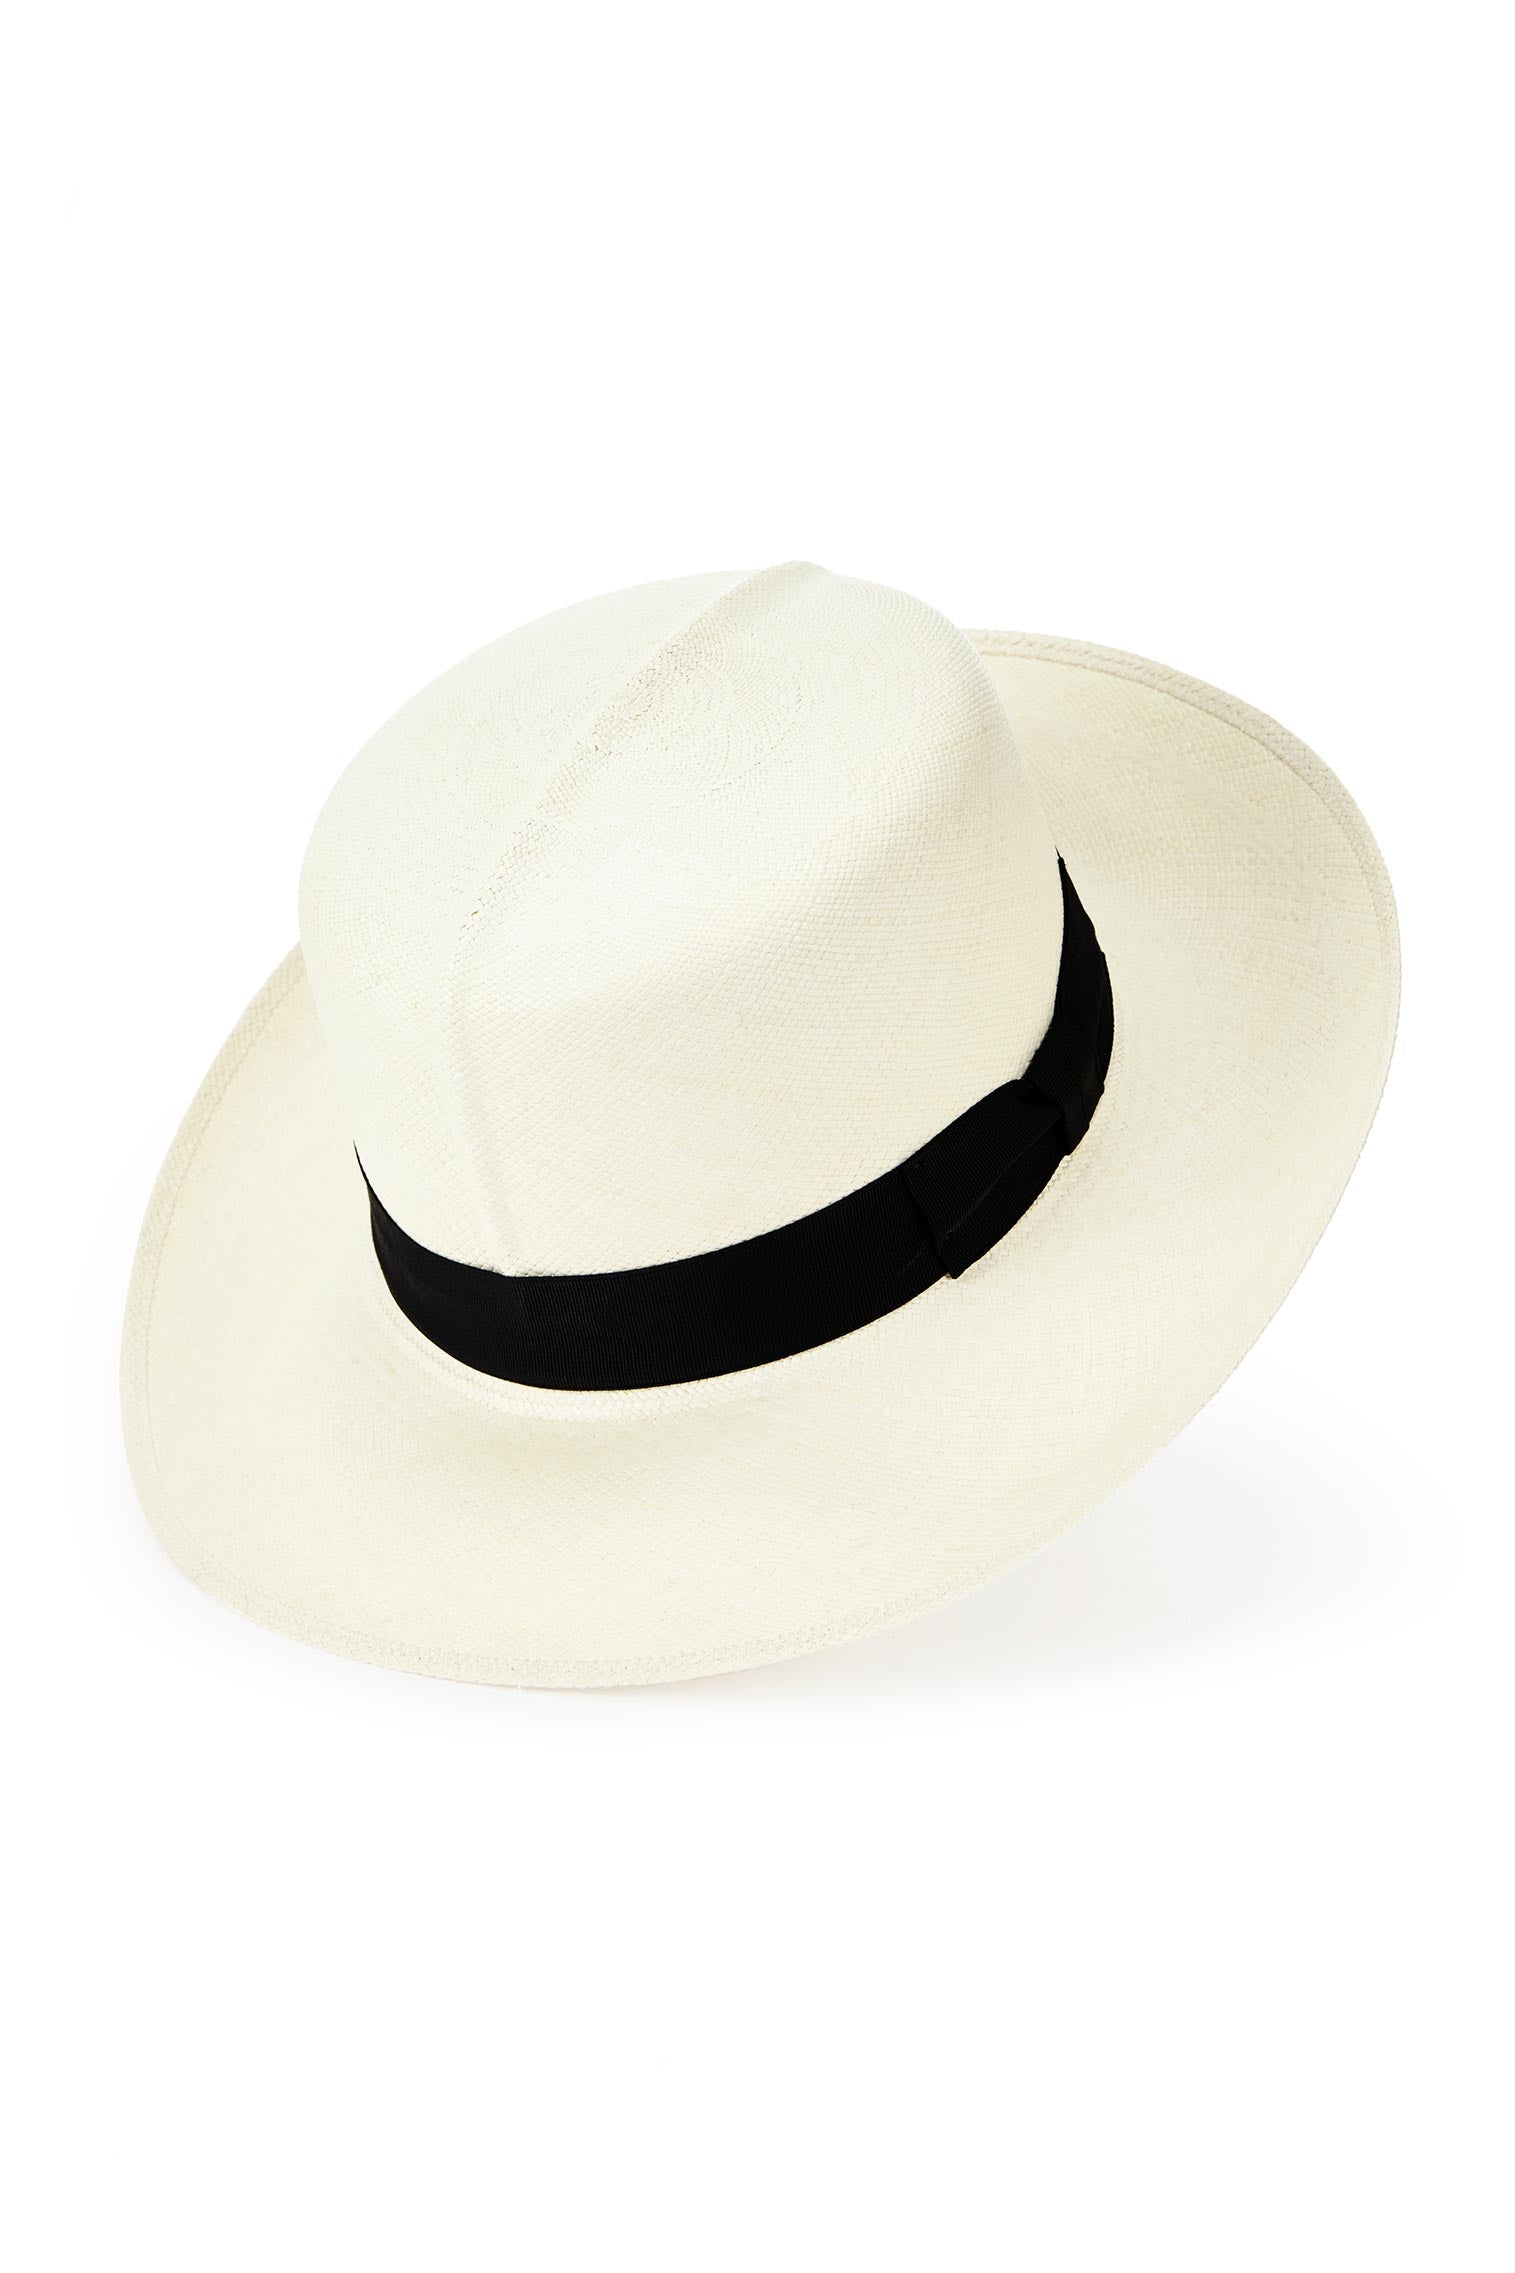 Men's Rollable Panama - Valentines Day Gift Ideas - Lock & Co. Hatters London UK